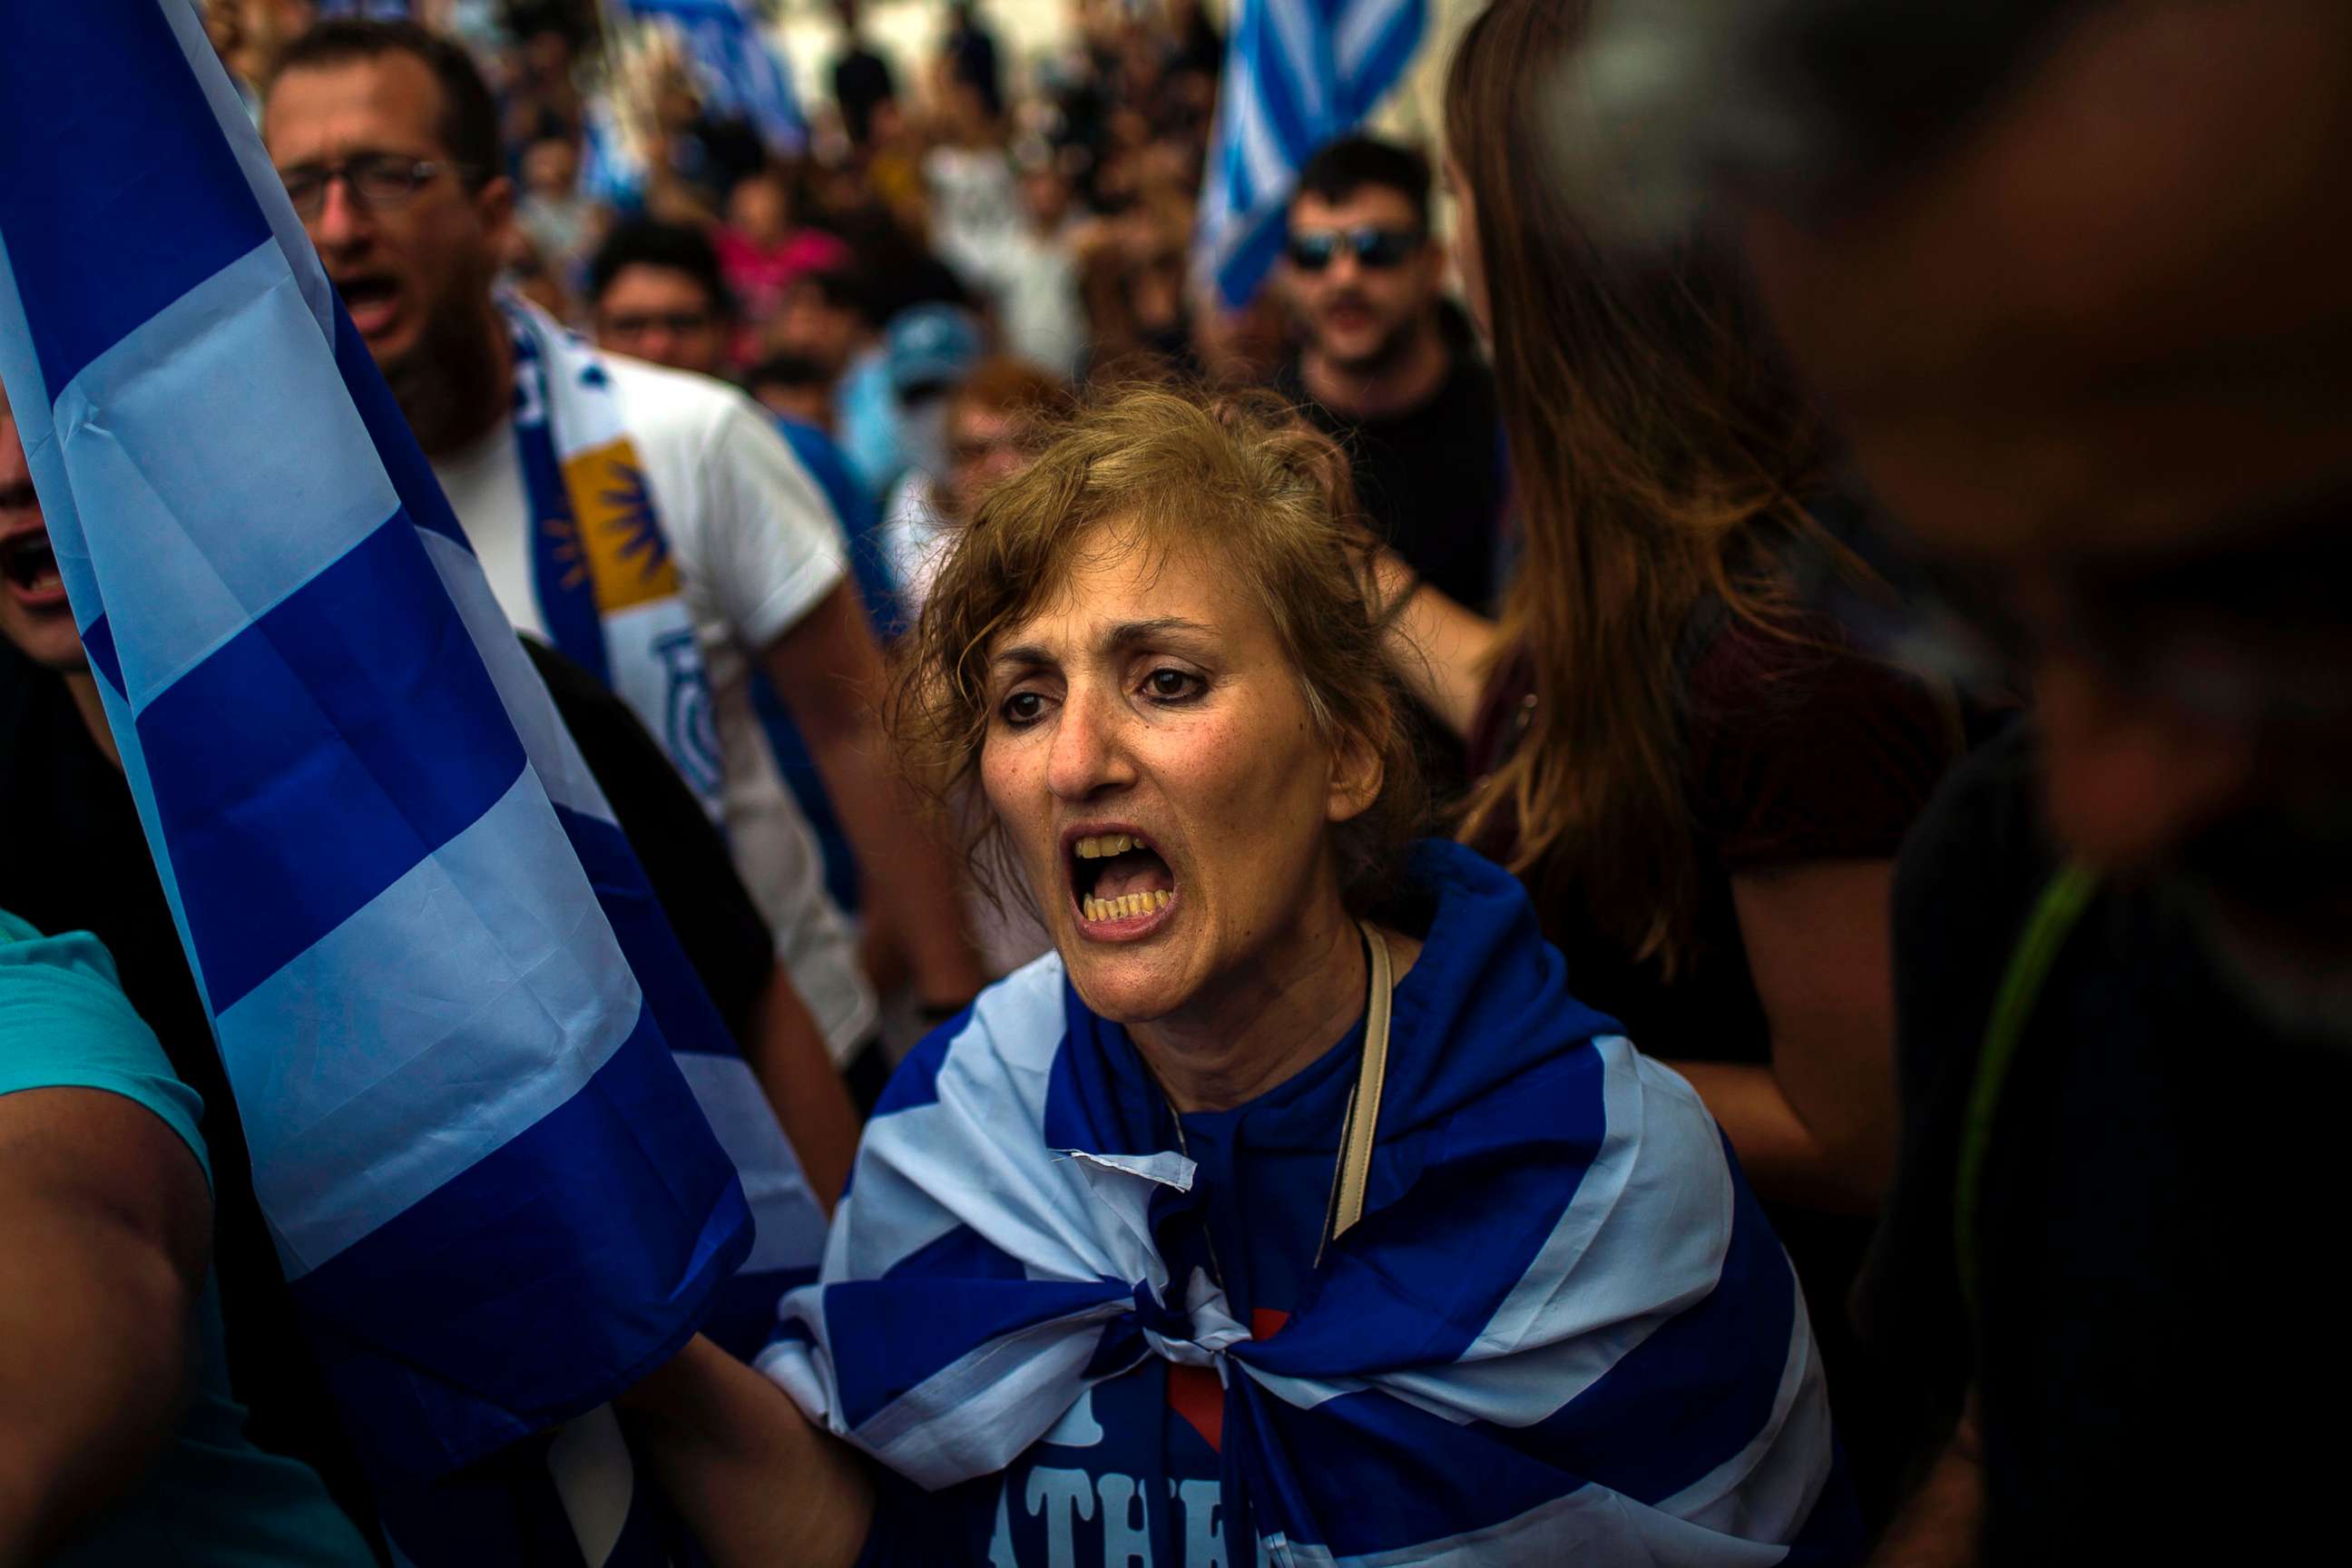 PHOTO: A woman shouts in a demonstration against the agreement reached to resolve a 27-year name row with Macedonia in Athens, Greece, June 16, 2018.